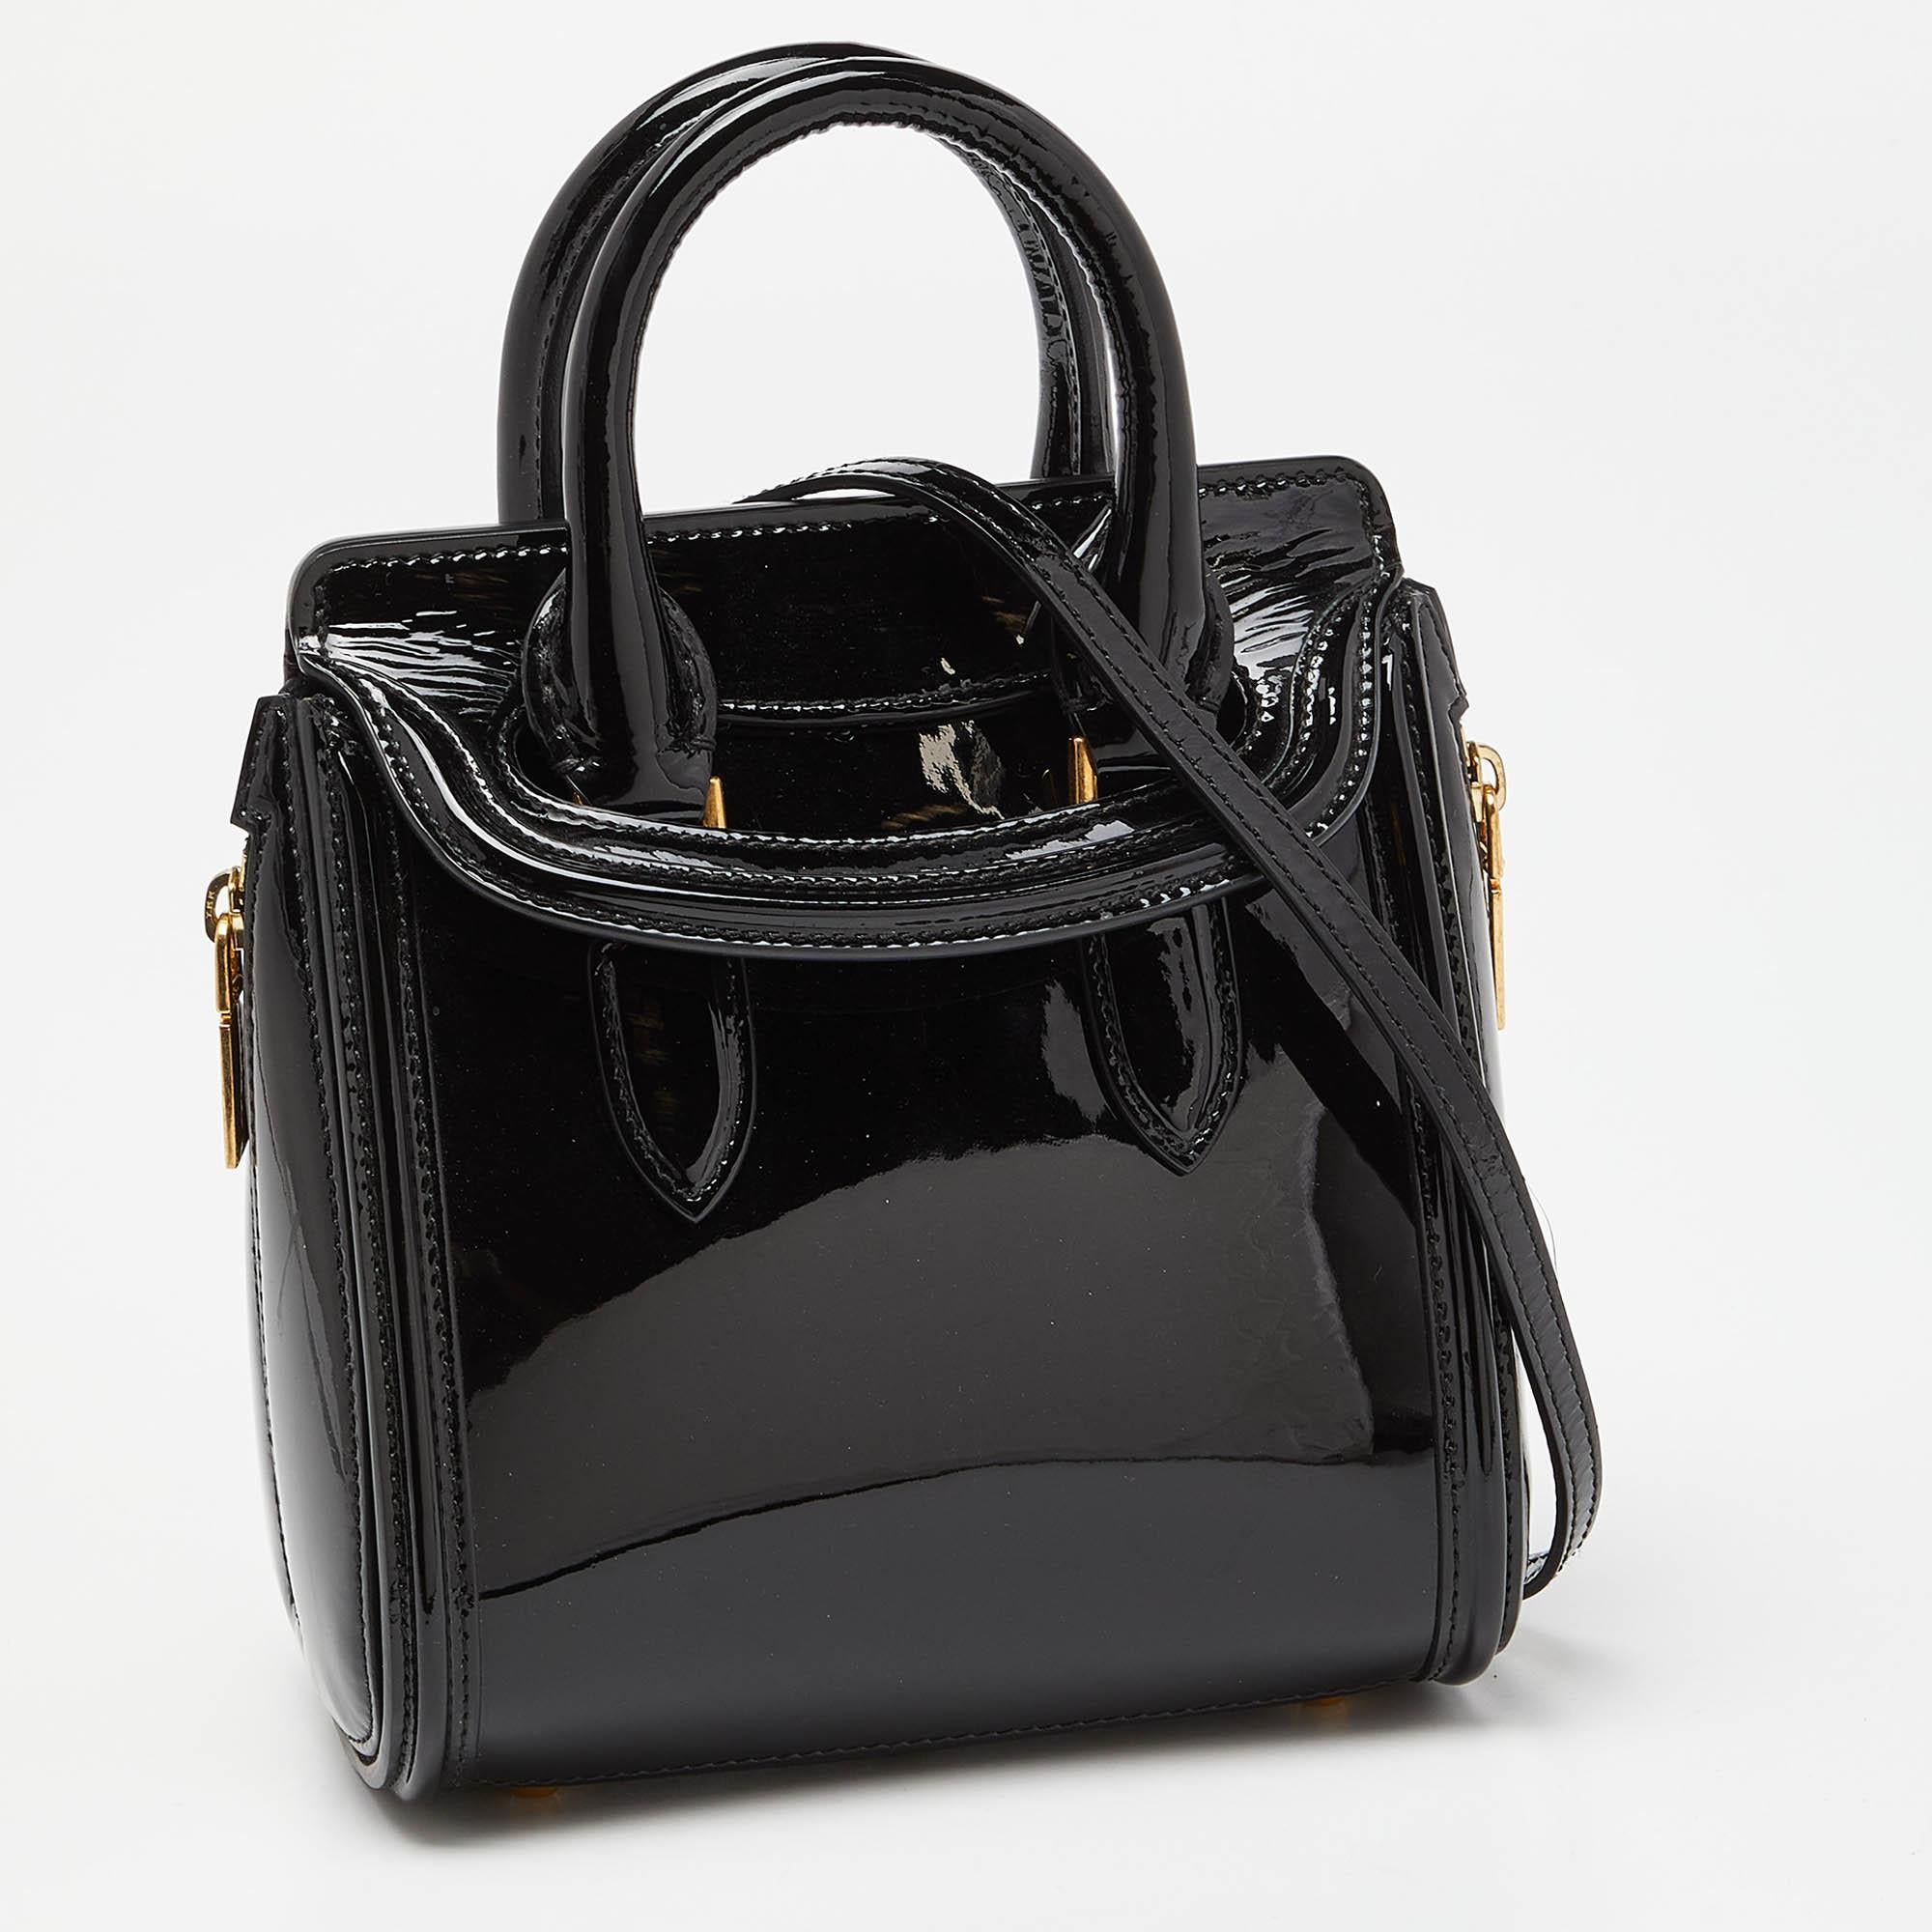 This Alexander McQueen satchel is built to hold your essentials most fashionably! Easy to style, well-made using the best materials, and coming from the top brand, the satchel will add immense style to your ensemble.

